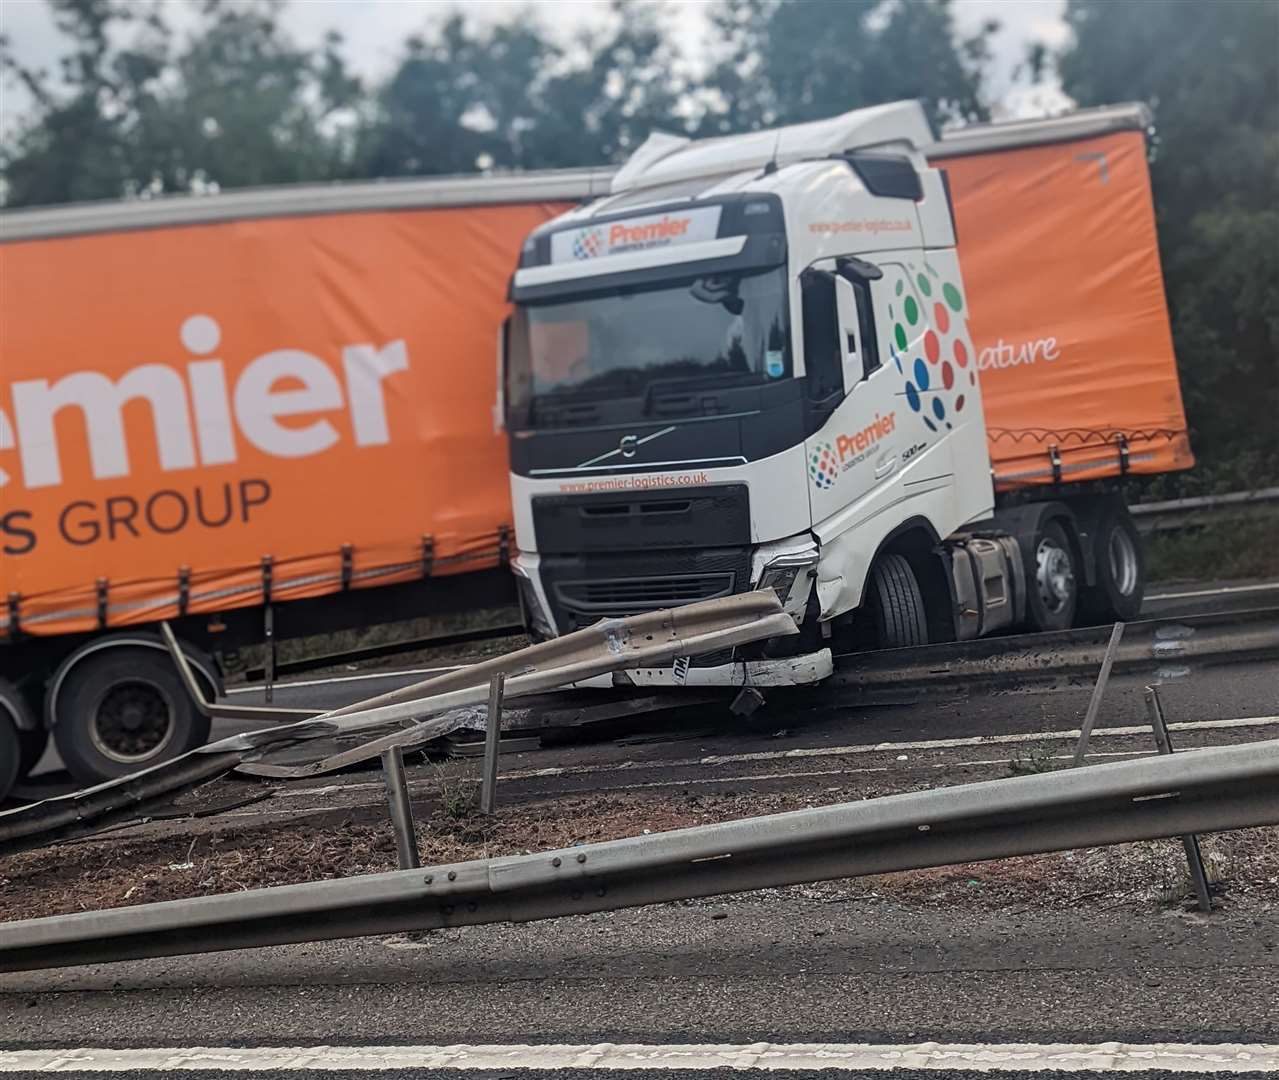 The HGV has damaged the central reservation